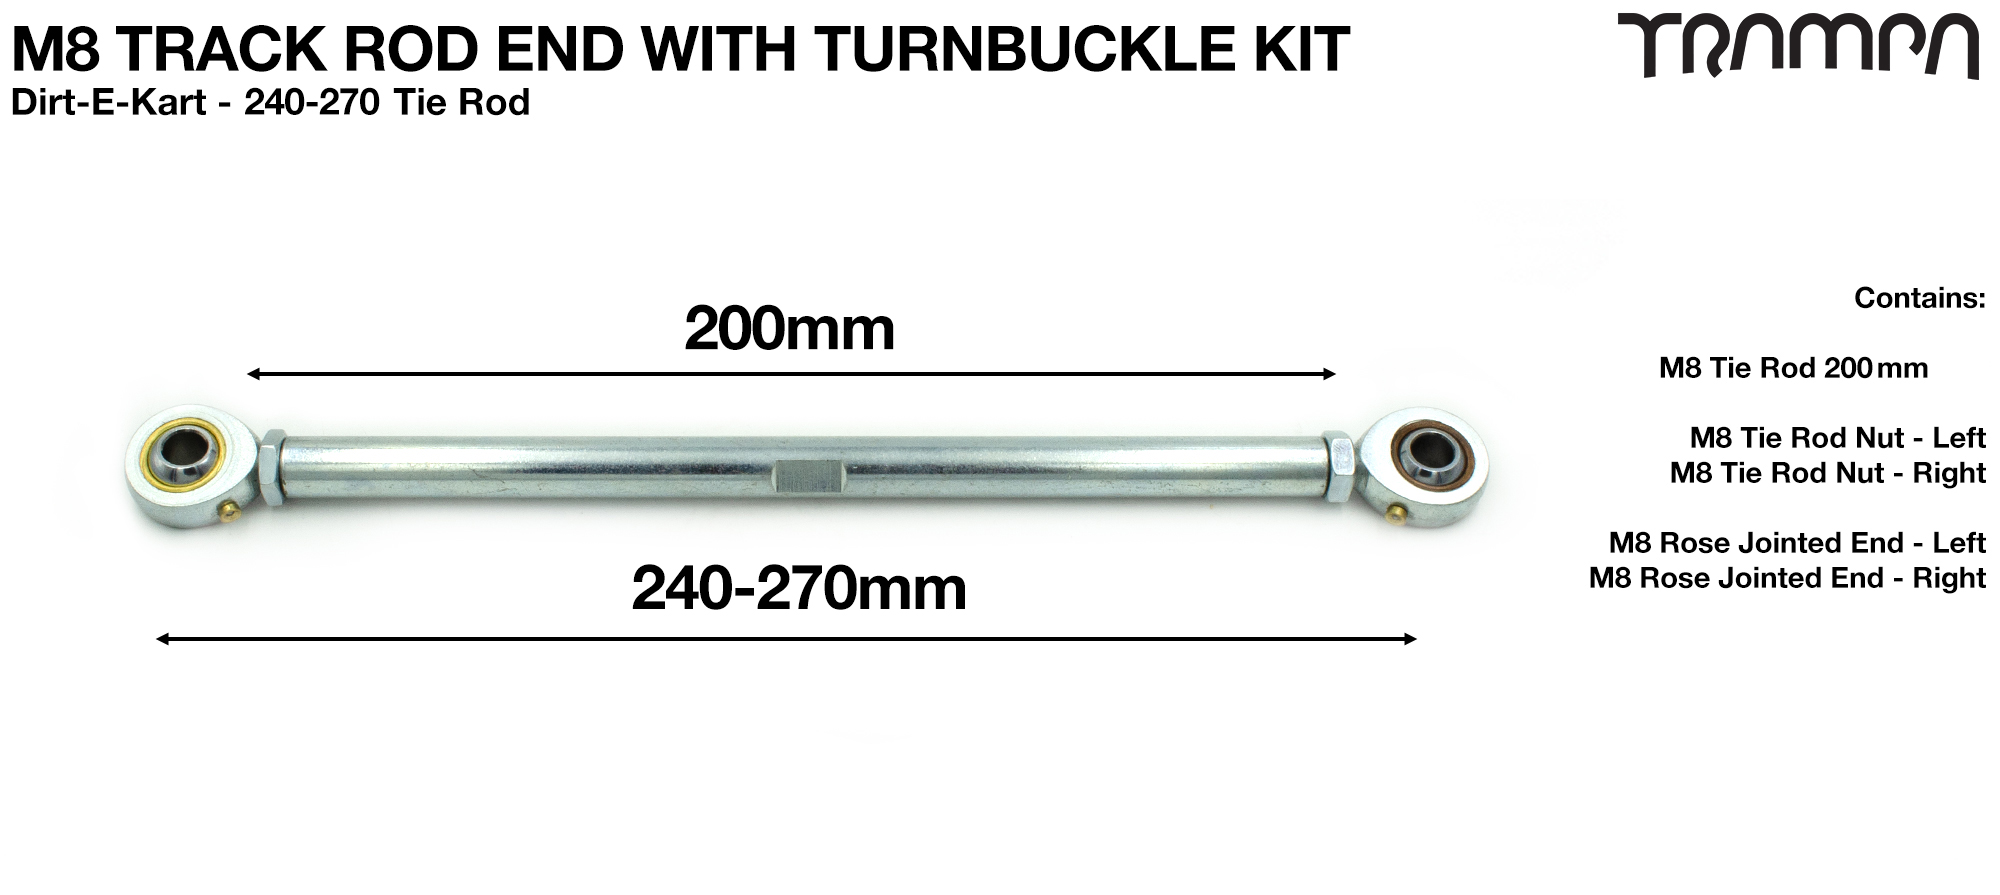 Rose Jointed M8 Track Rod End with Turnbuckle Adjustment 240-270mm x1